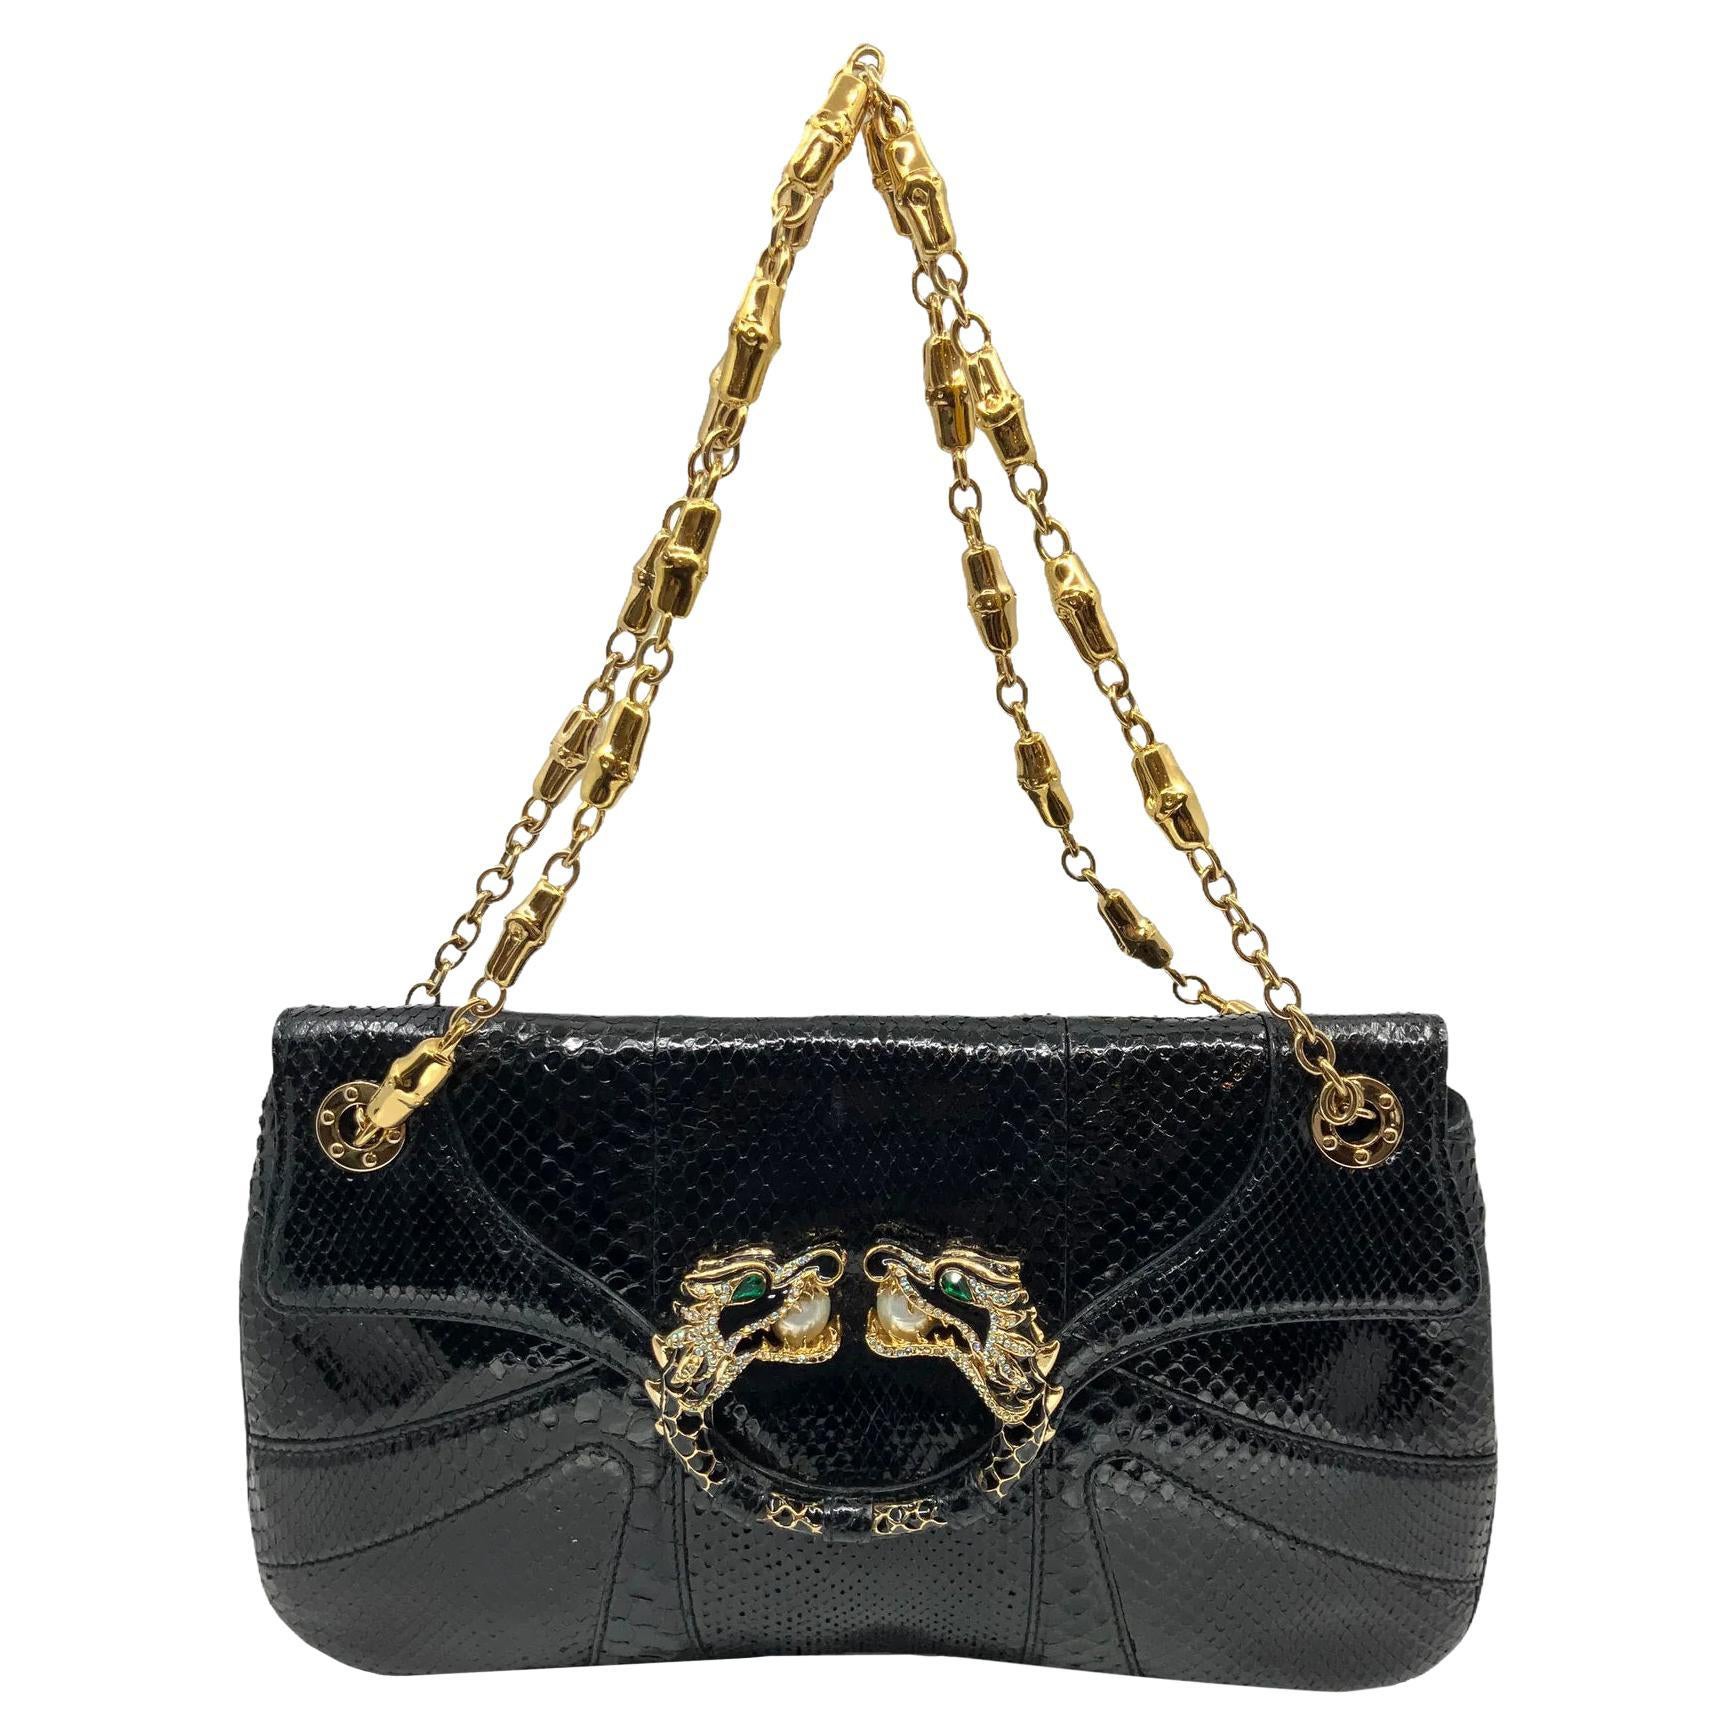 TOM FORD for GUCCI LIMITED EDITION  SNAKESKIN JEWELED DRAGON BAG 